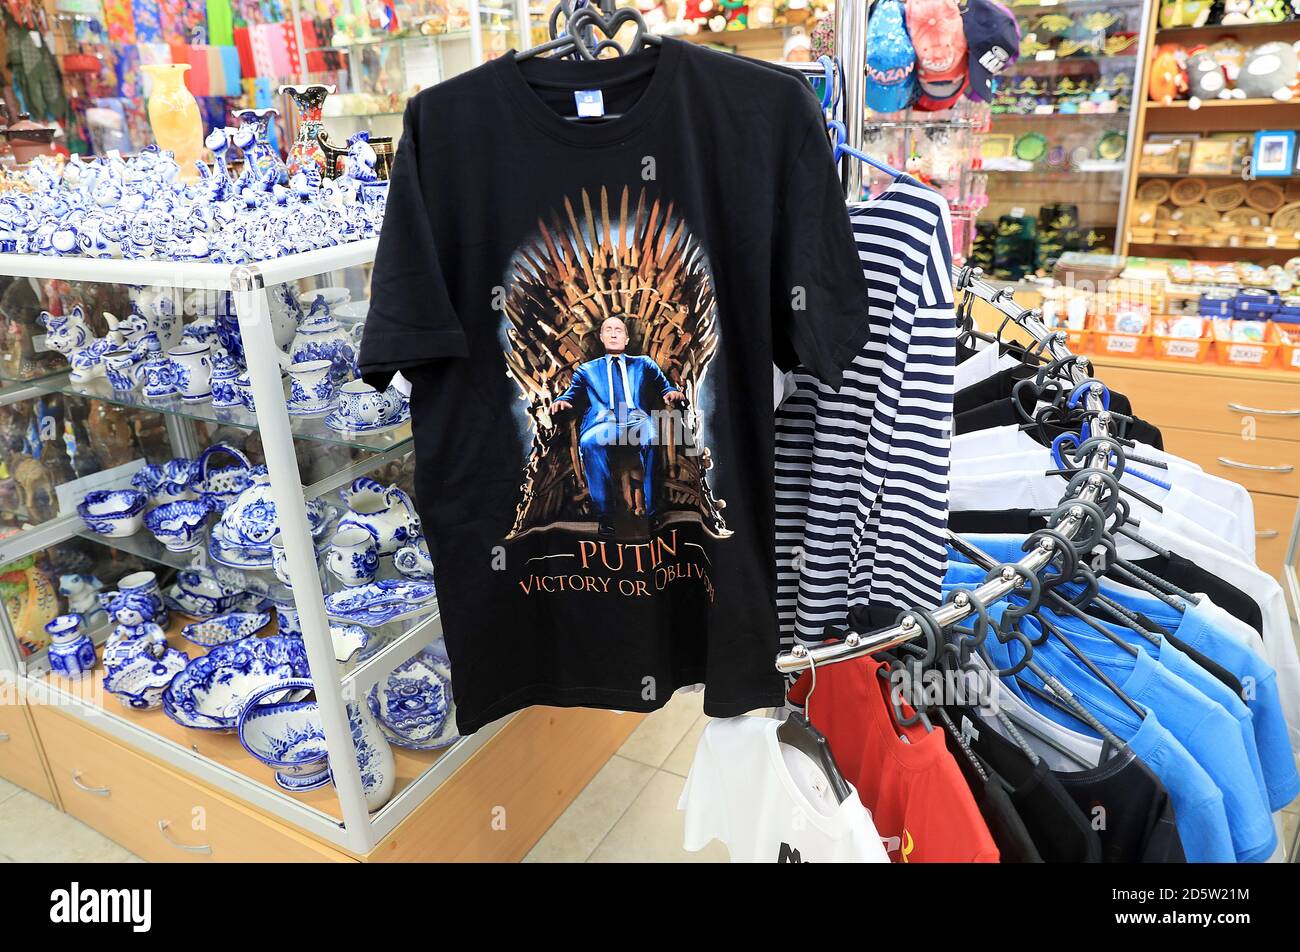 A t-shirt of Vladimir Putin on the front in a shop in Kazan Stock Photo